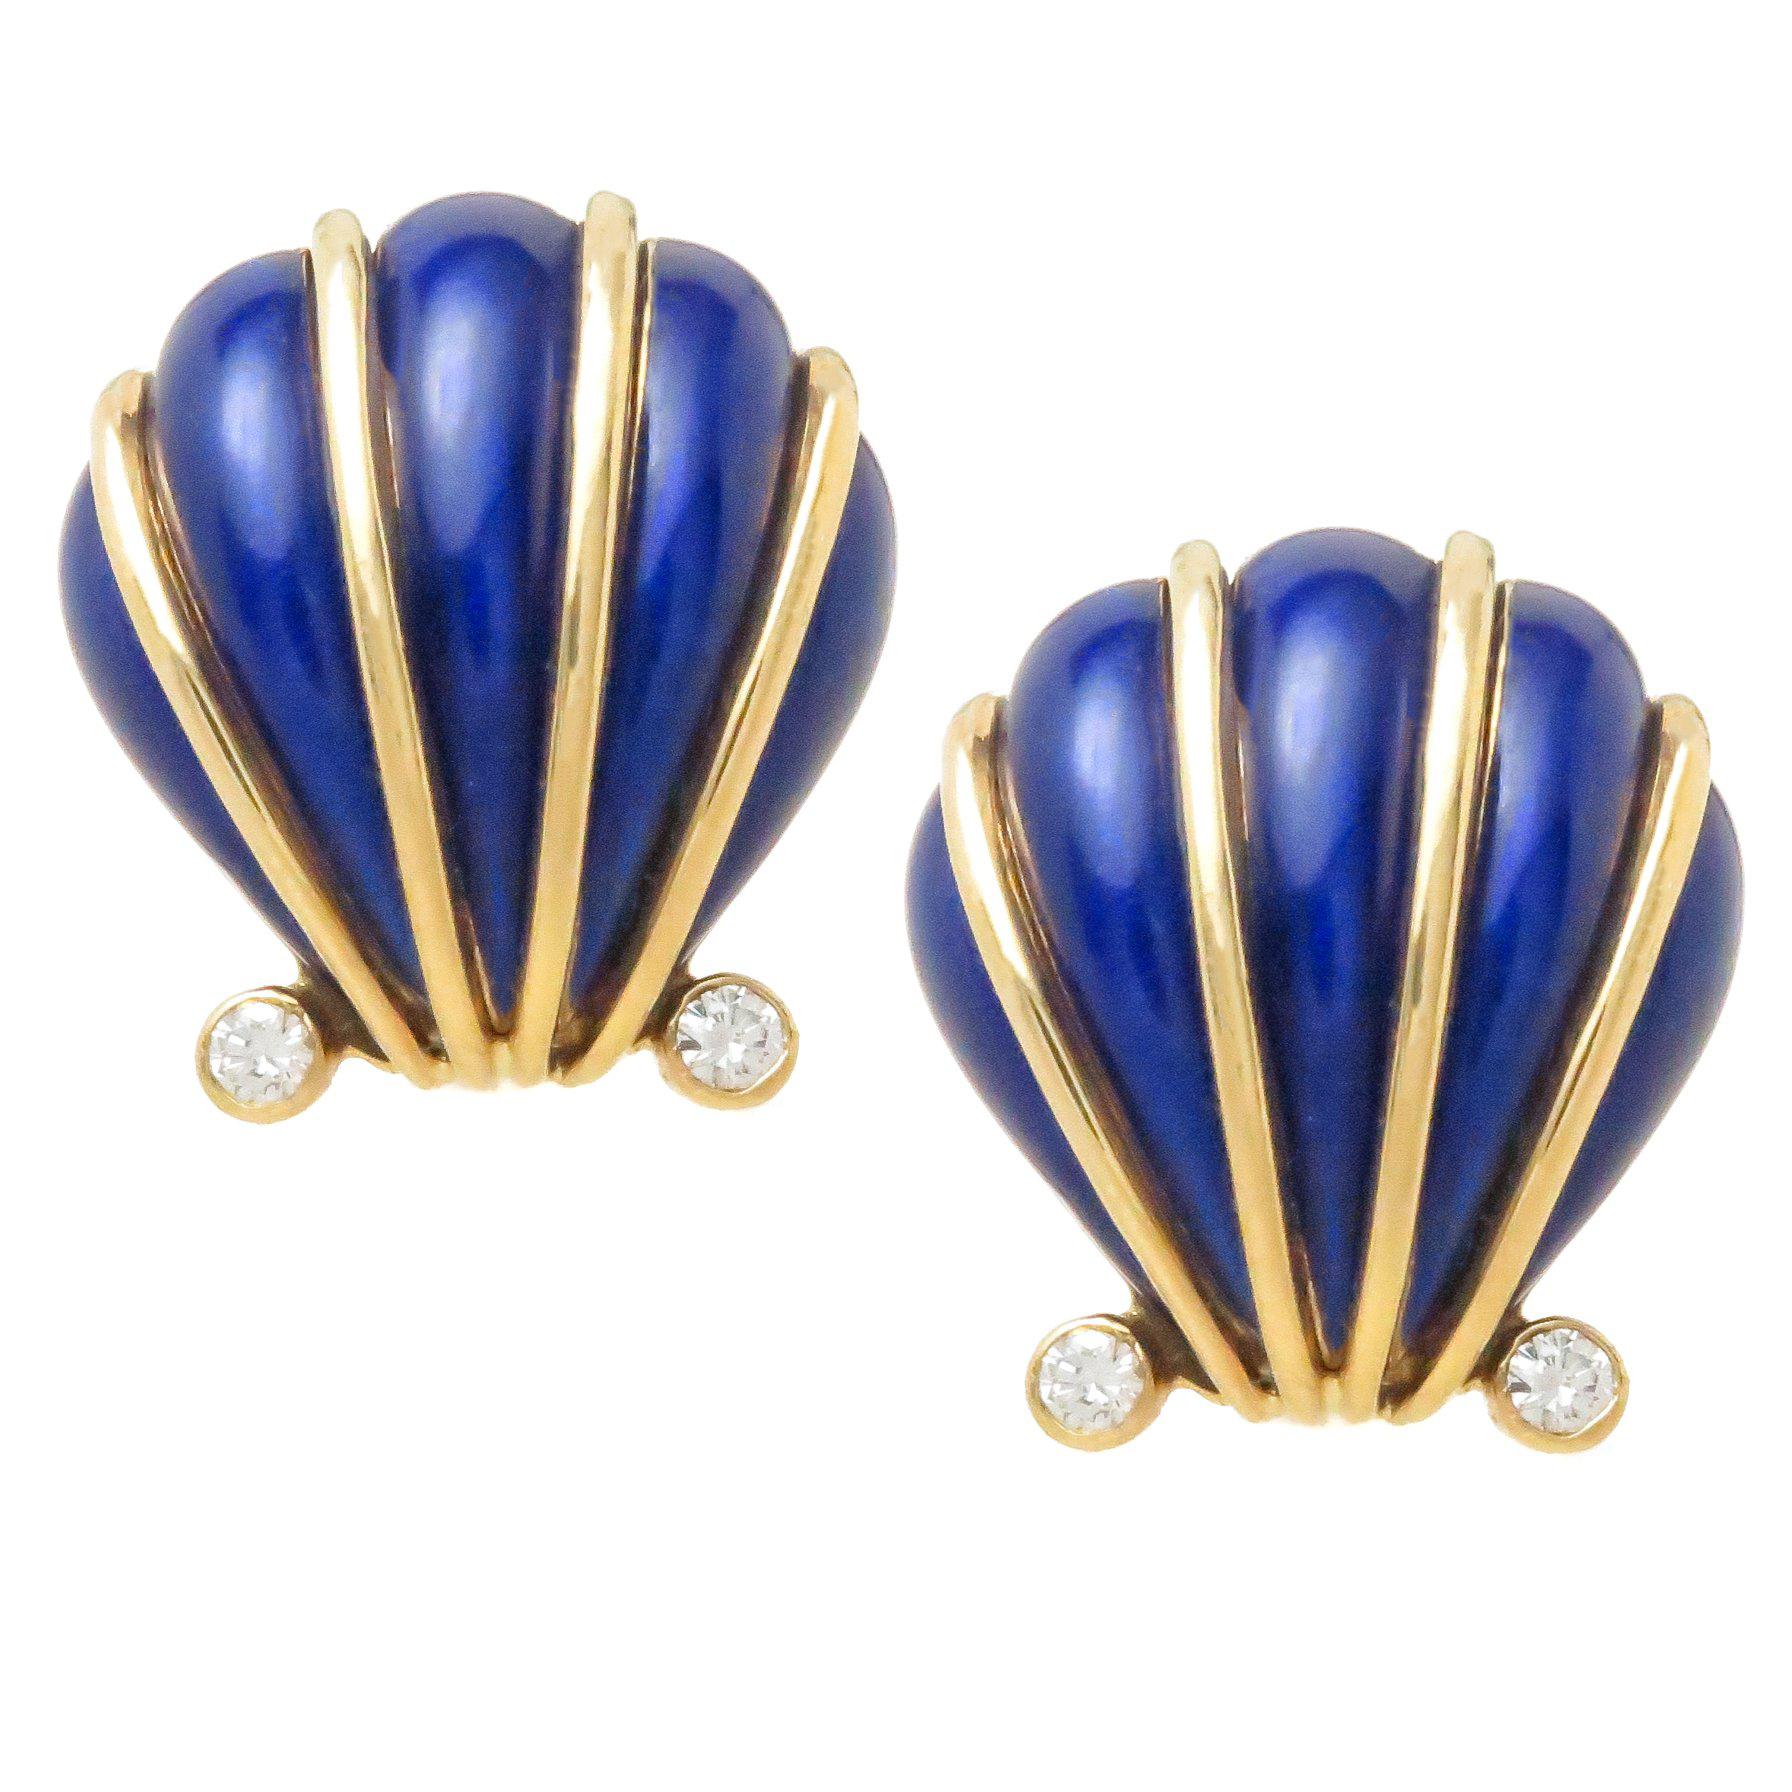 Tiffany & Company Schlumberger Gold Diamond and Enamel Shell Earrings For Sale